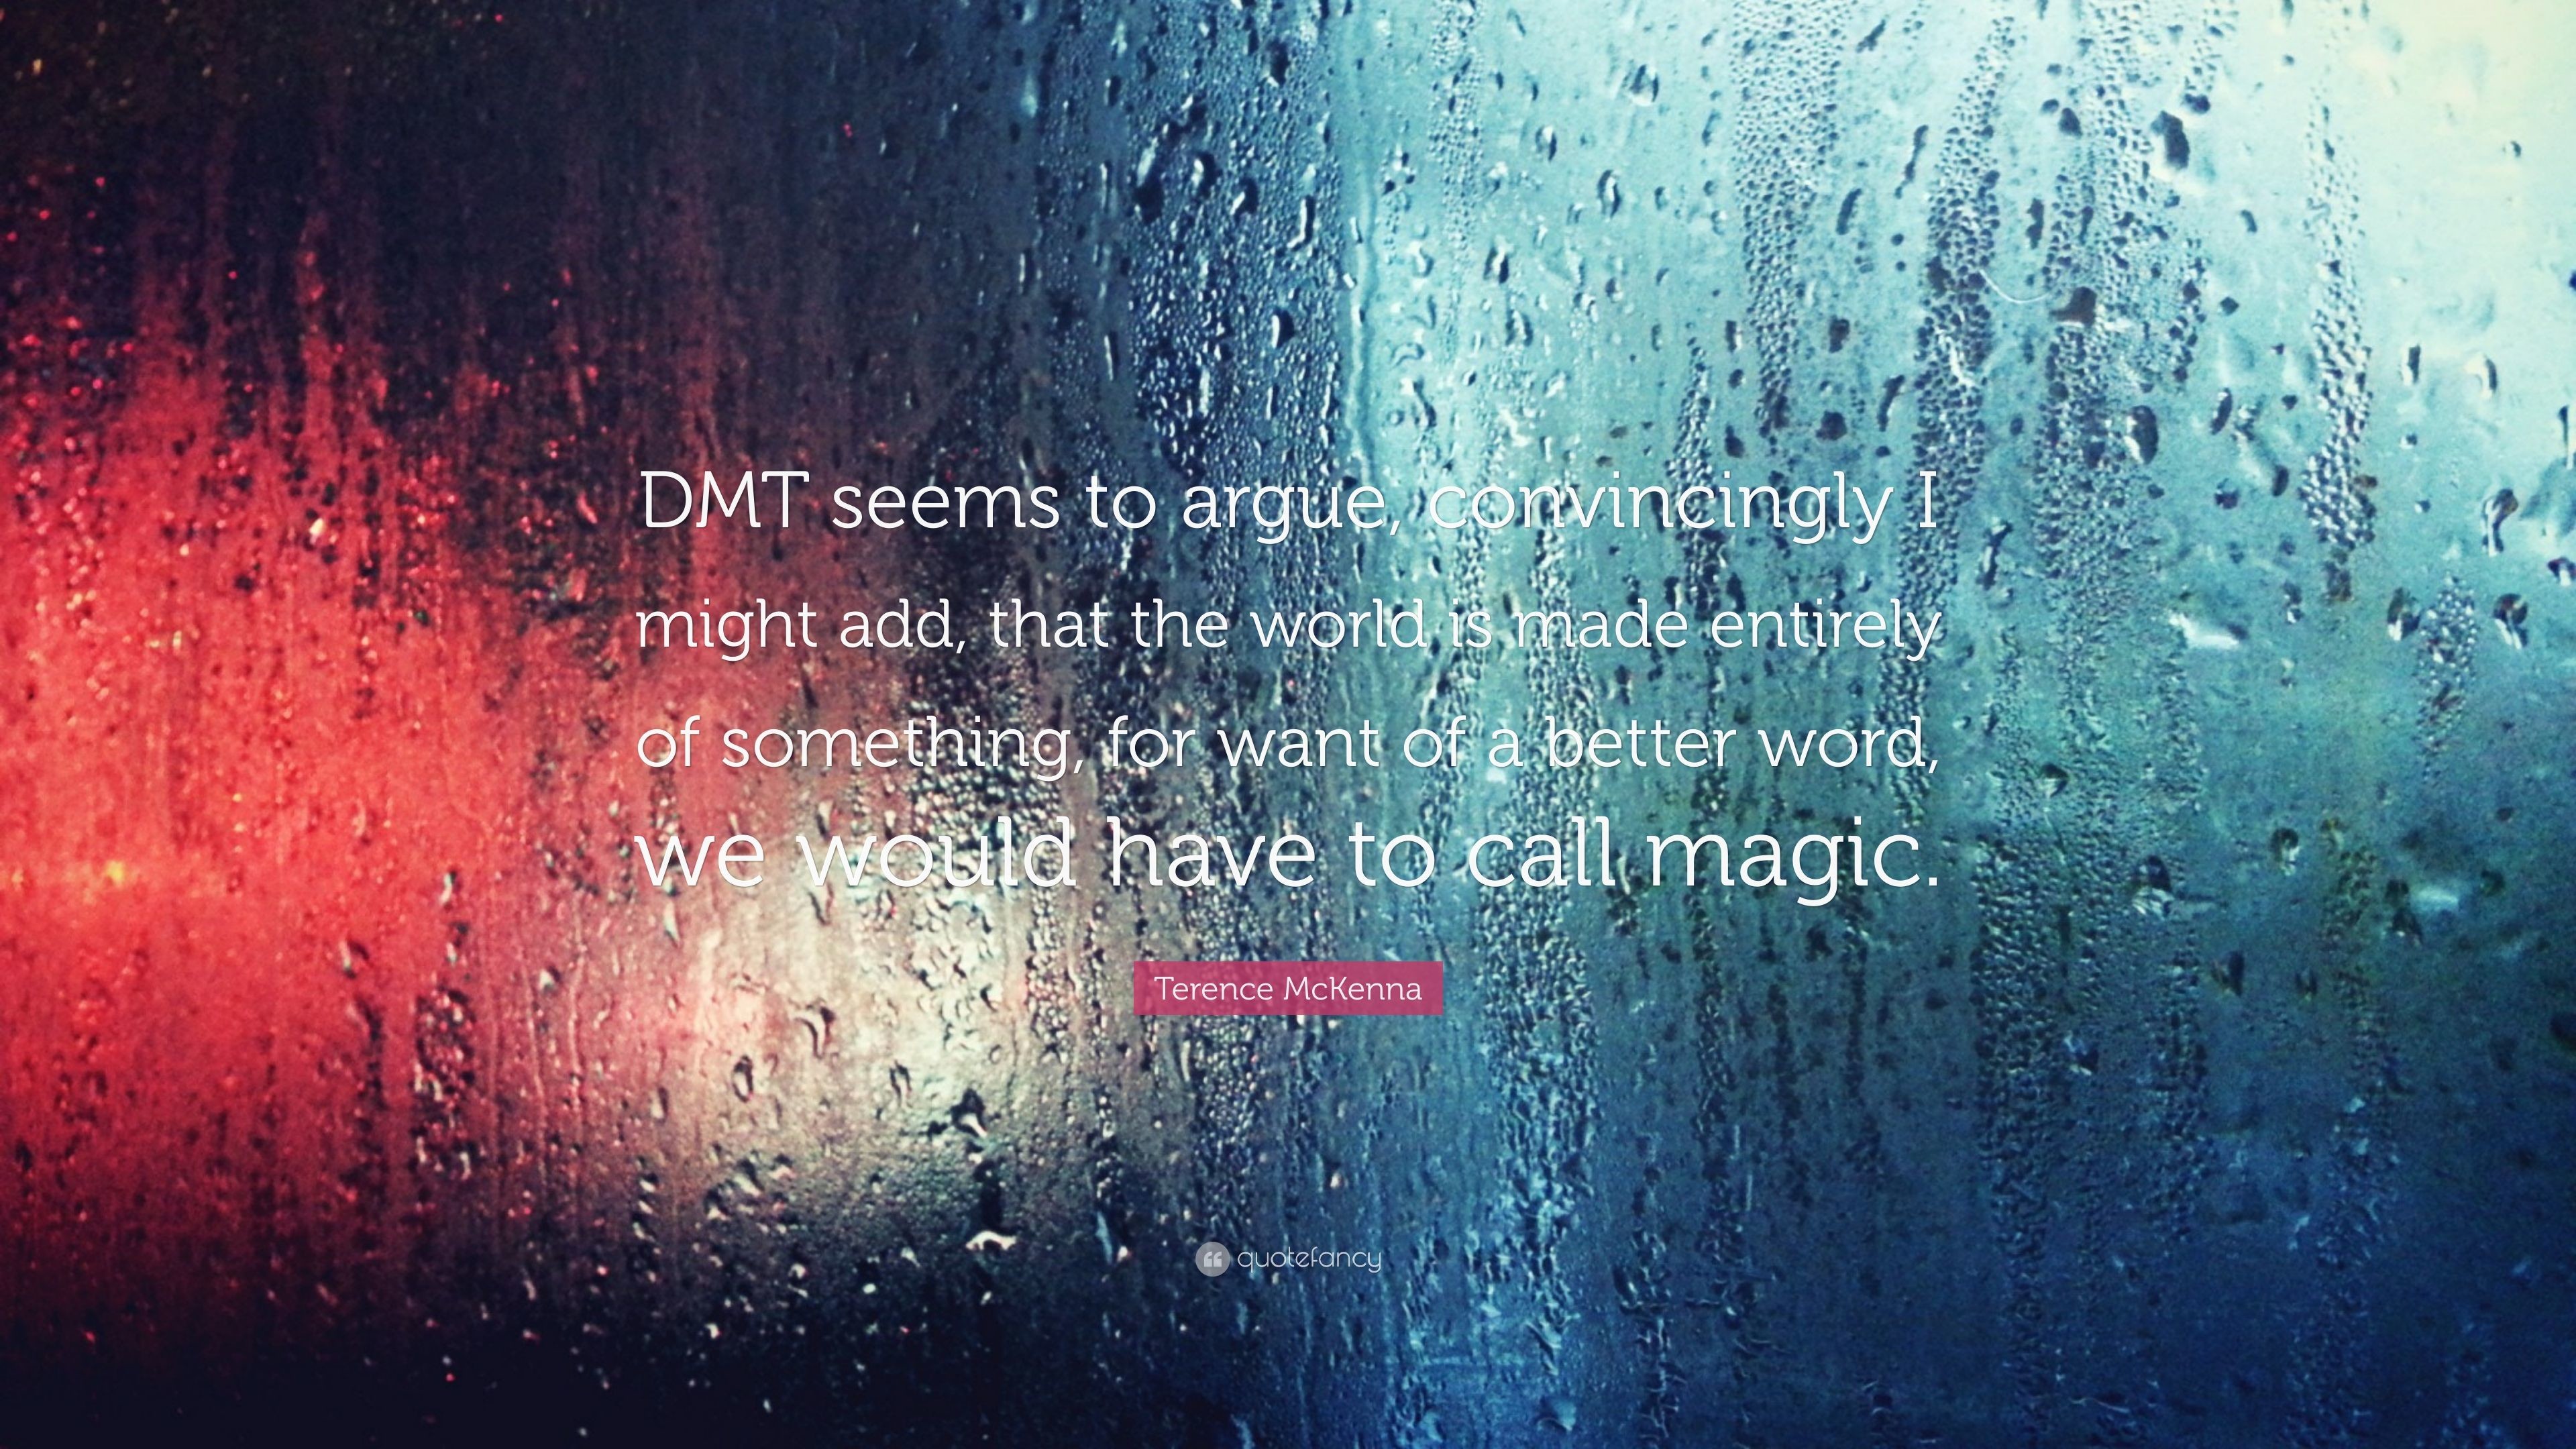 3840x2160 Terence McKenna Quote: “DMT seems to argue, convincingly I might add, that